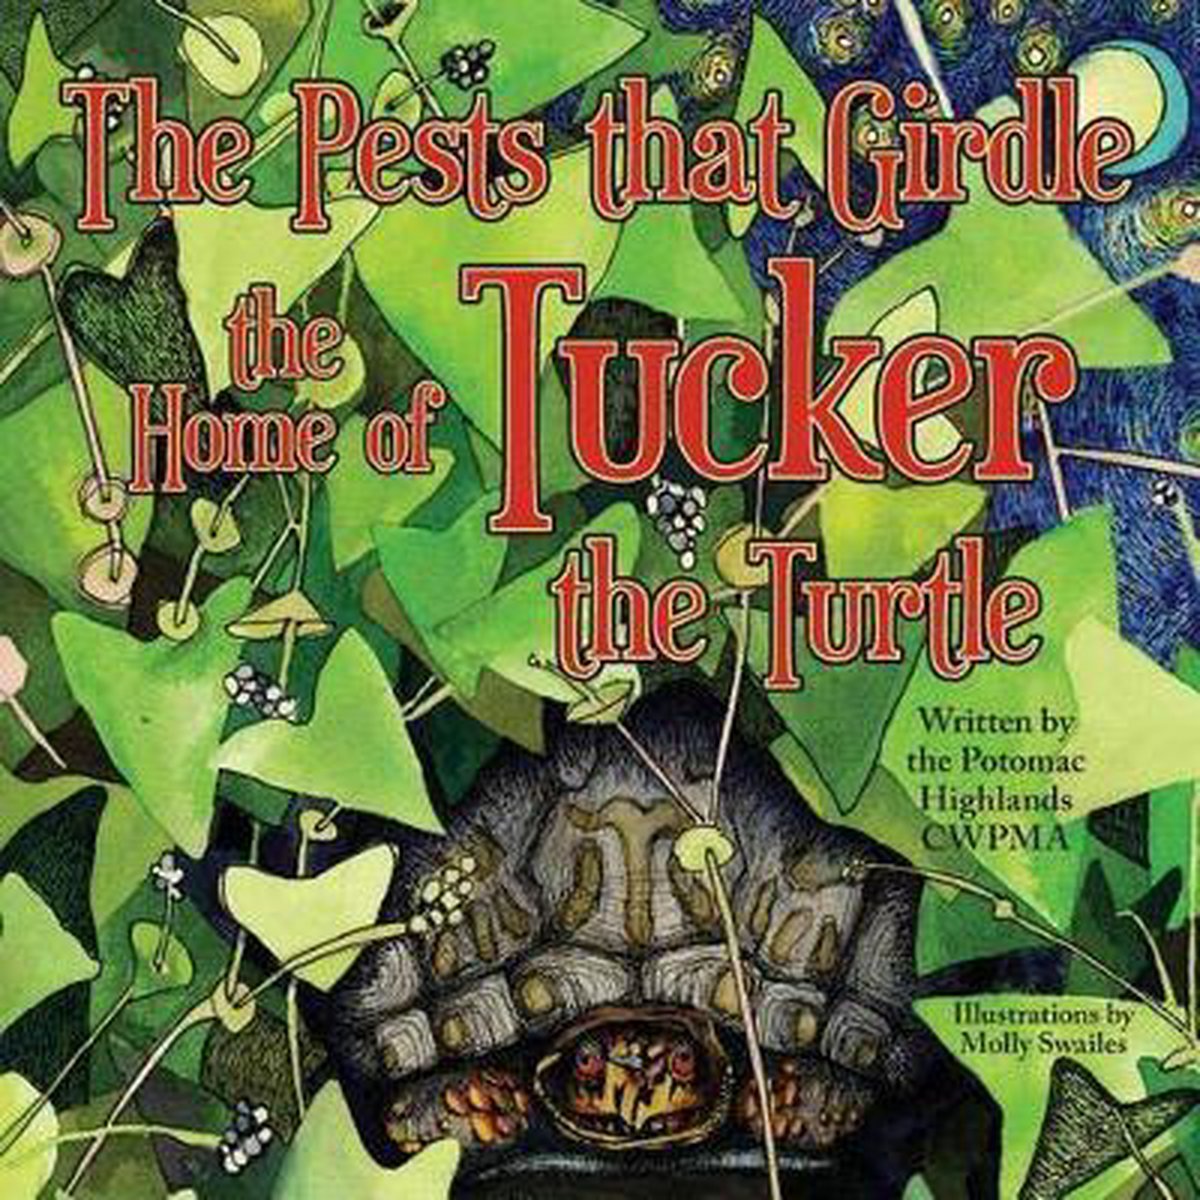 The Pests That Girdle the Home of Tucker the Turtle - Potomac Highlands Cwpma